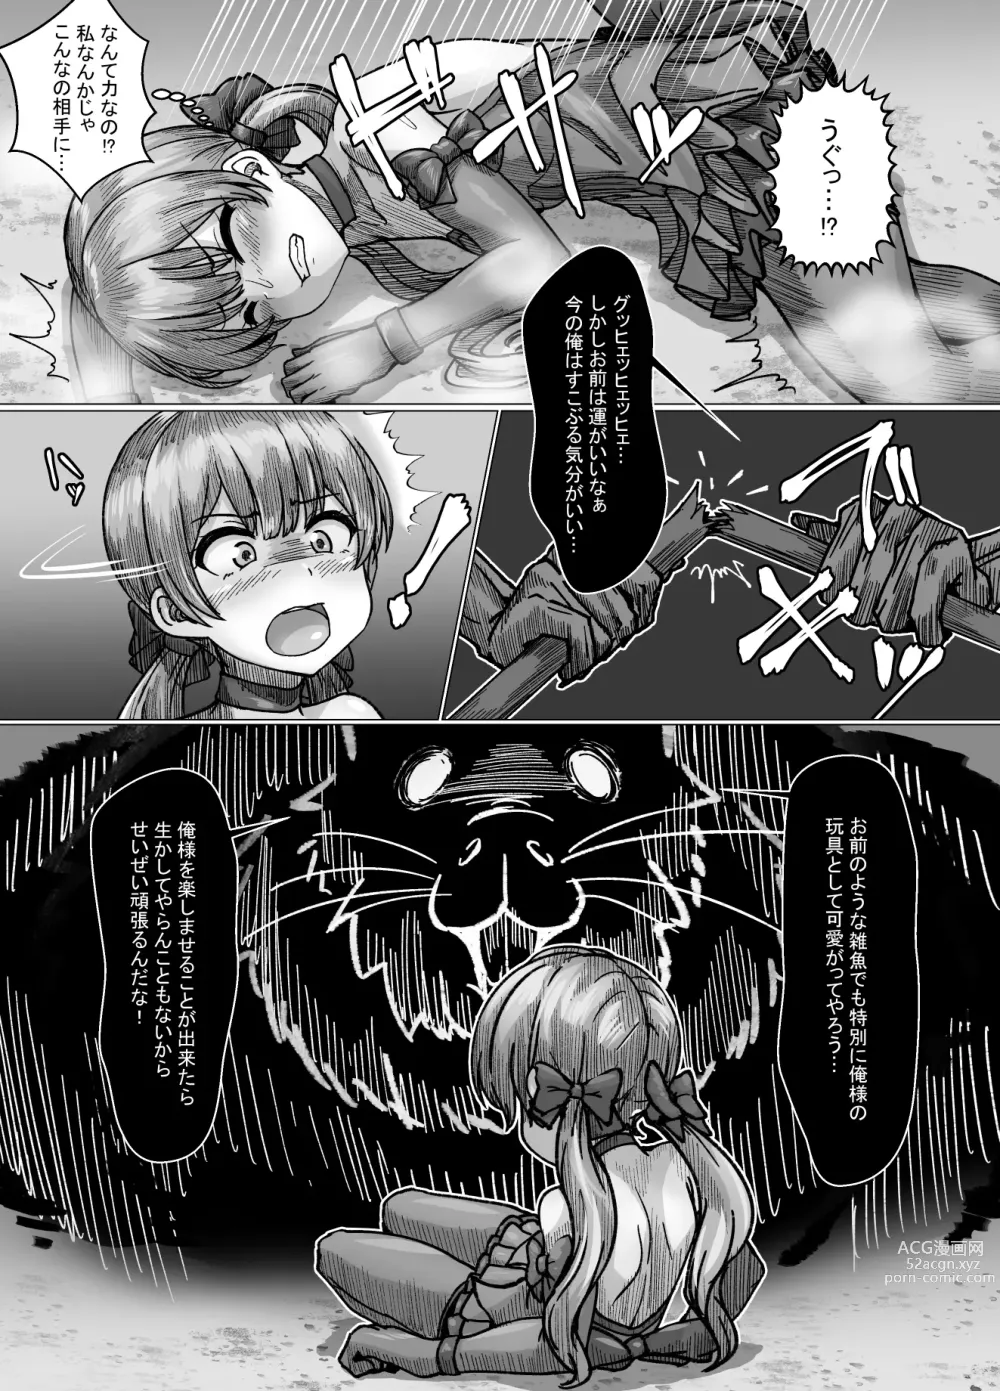 Page 7 of doujinshi Shes a weak little monster magical girl, but no matter how strong her opponent is, she'll never lose!